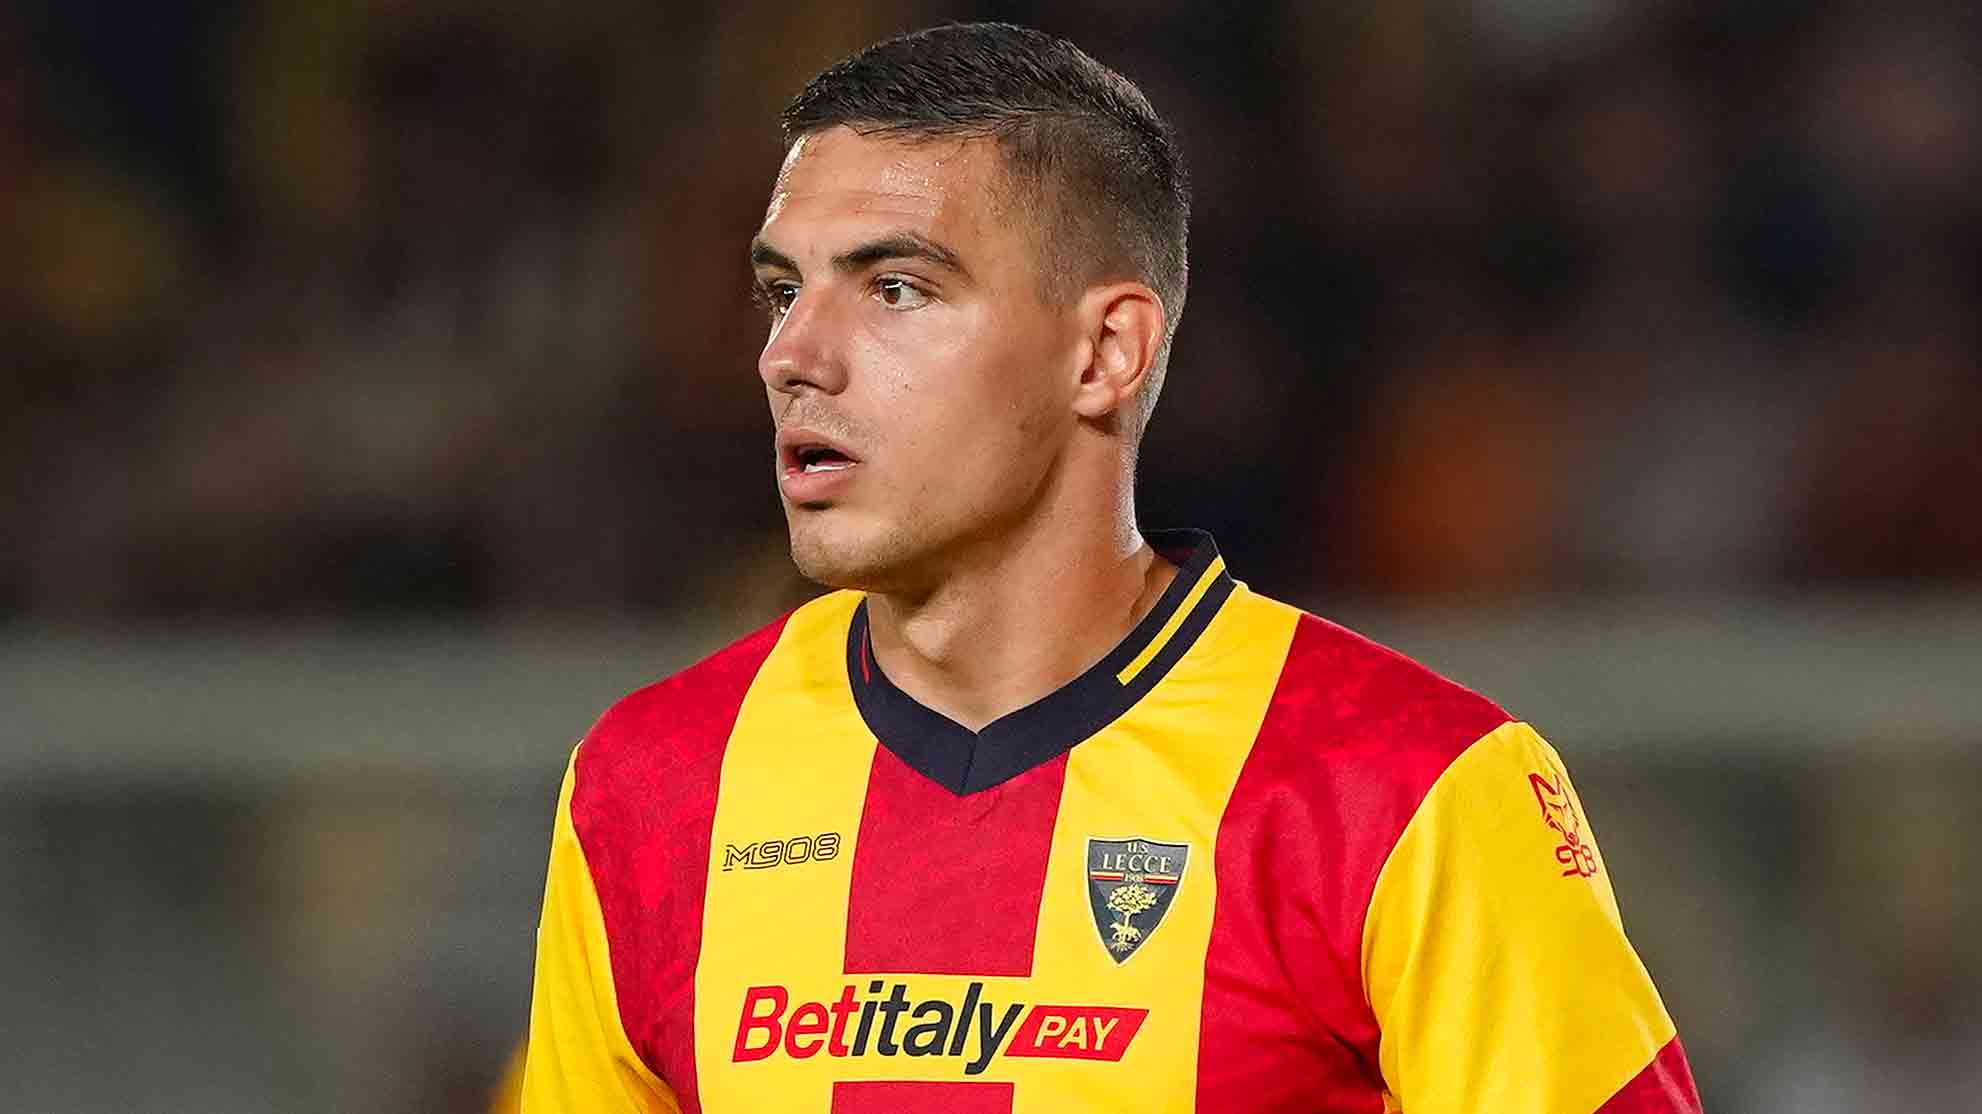 Lecce directors bet on an unknown prodigy from Serbia & Montenegro earlier in the transfer window and their decision has so far been paying dividends.